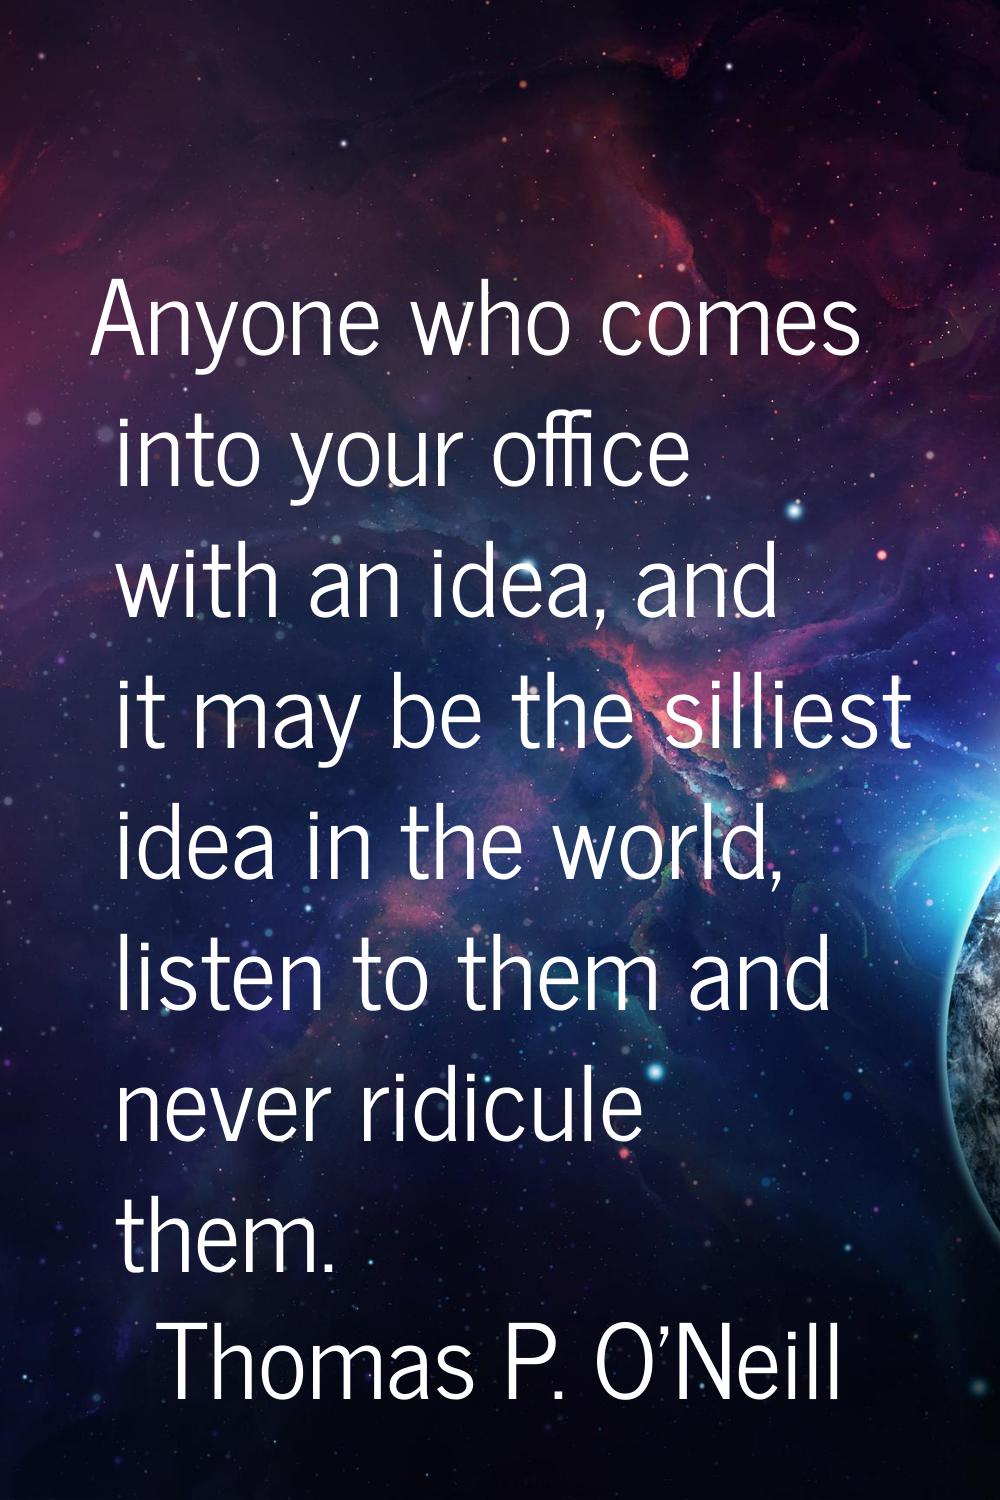 Anyone who comes into your office with an idea, and it may be the silliest idea in the world, liste